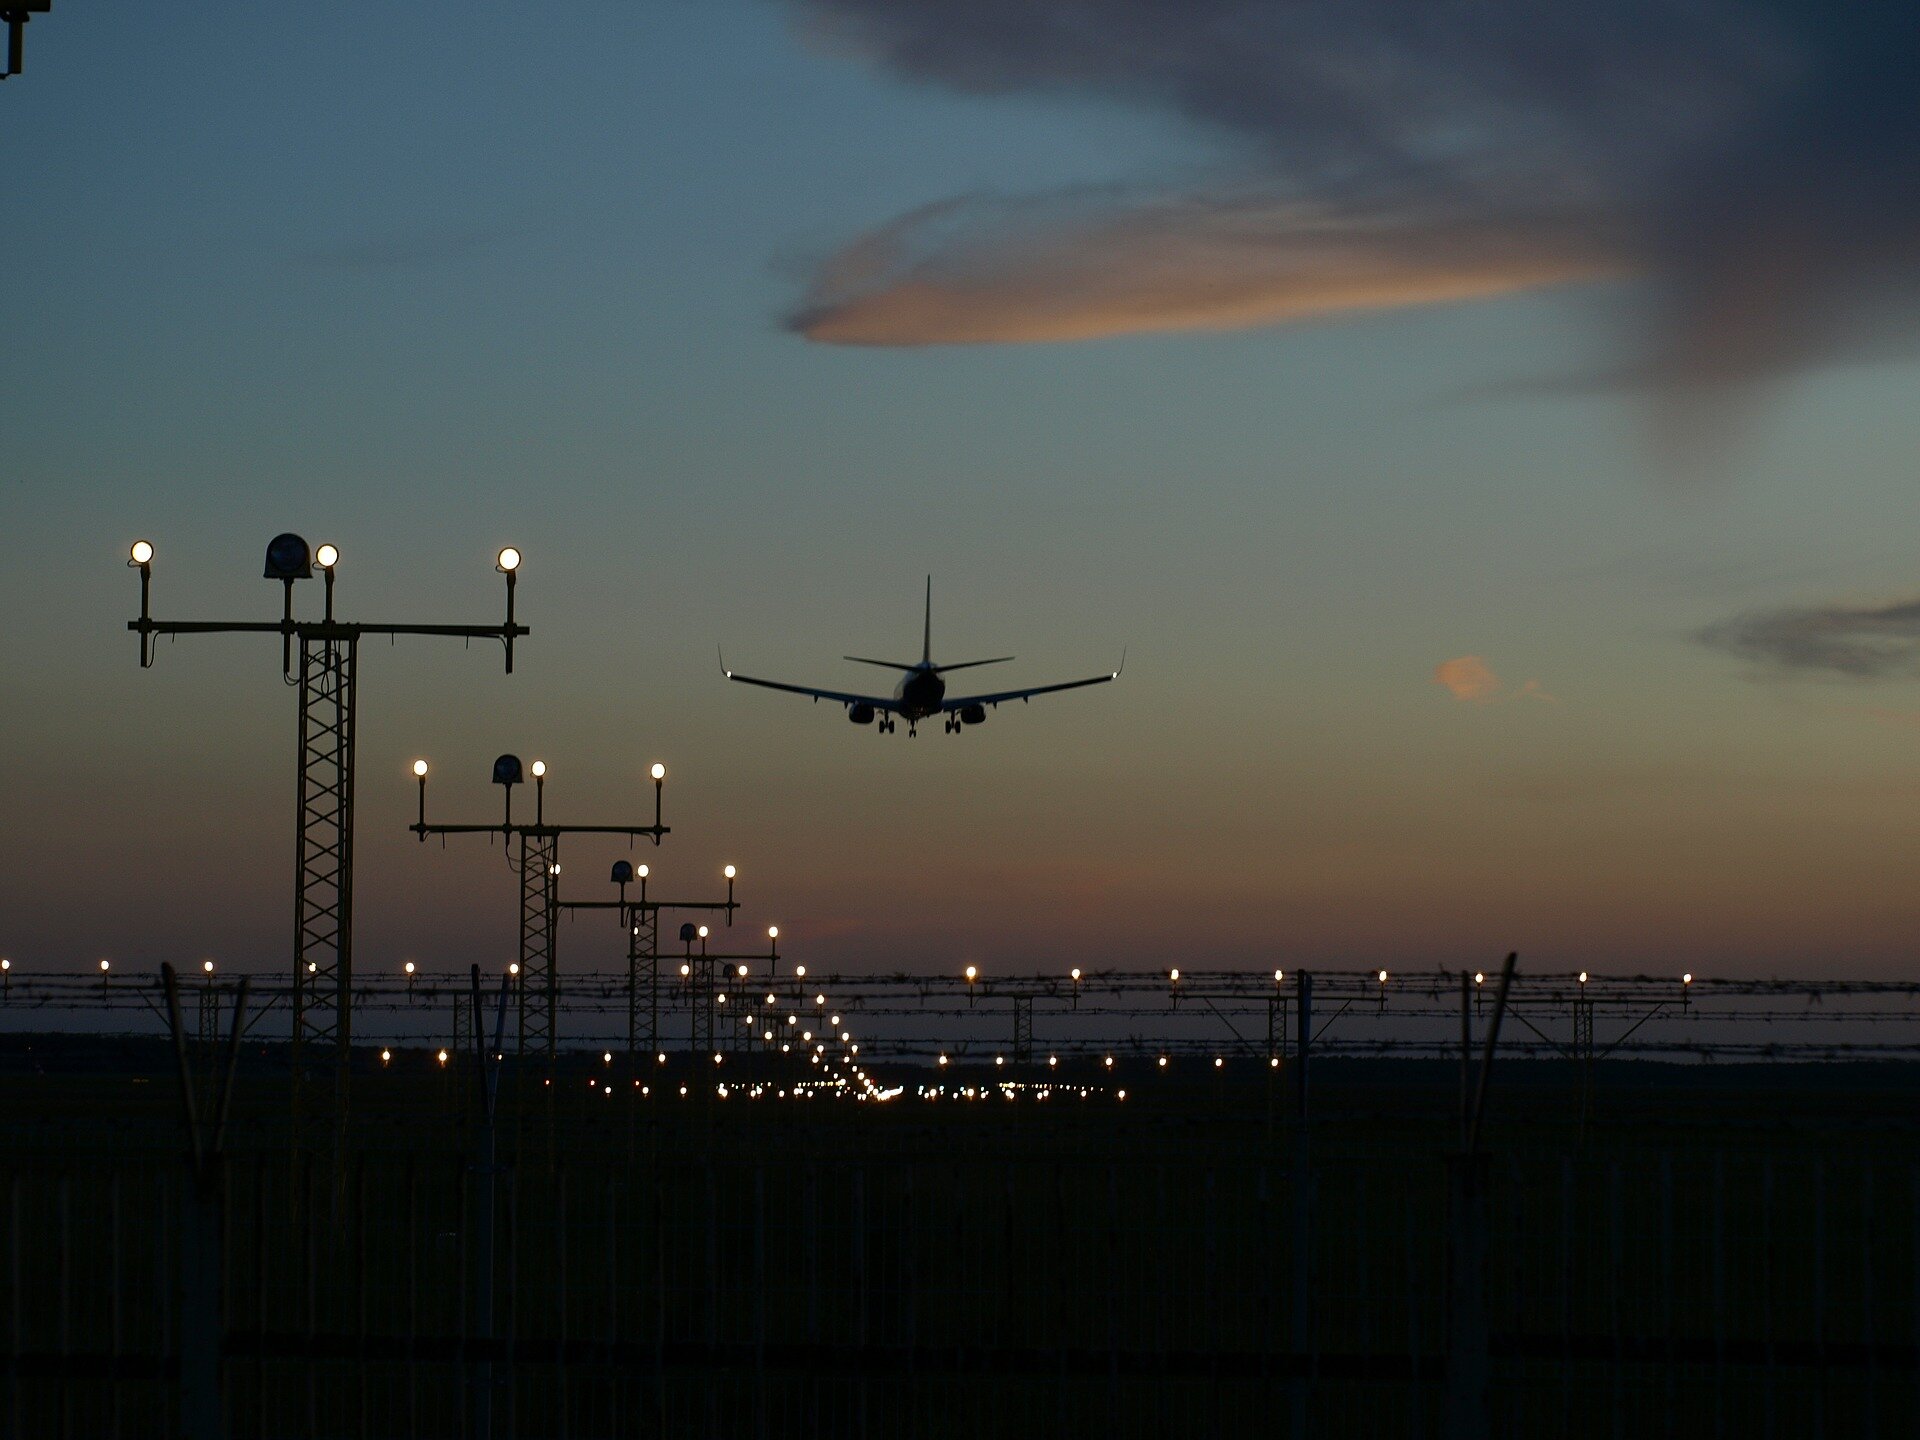 Investment urgently needed in new technology to mitigate carbon dioxide emissions at airports, report reveals